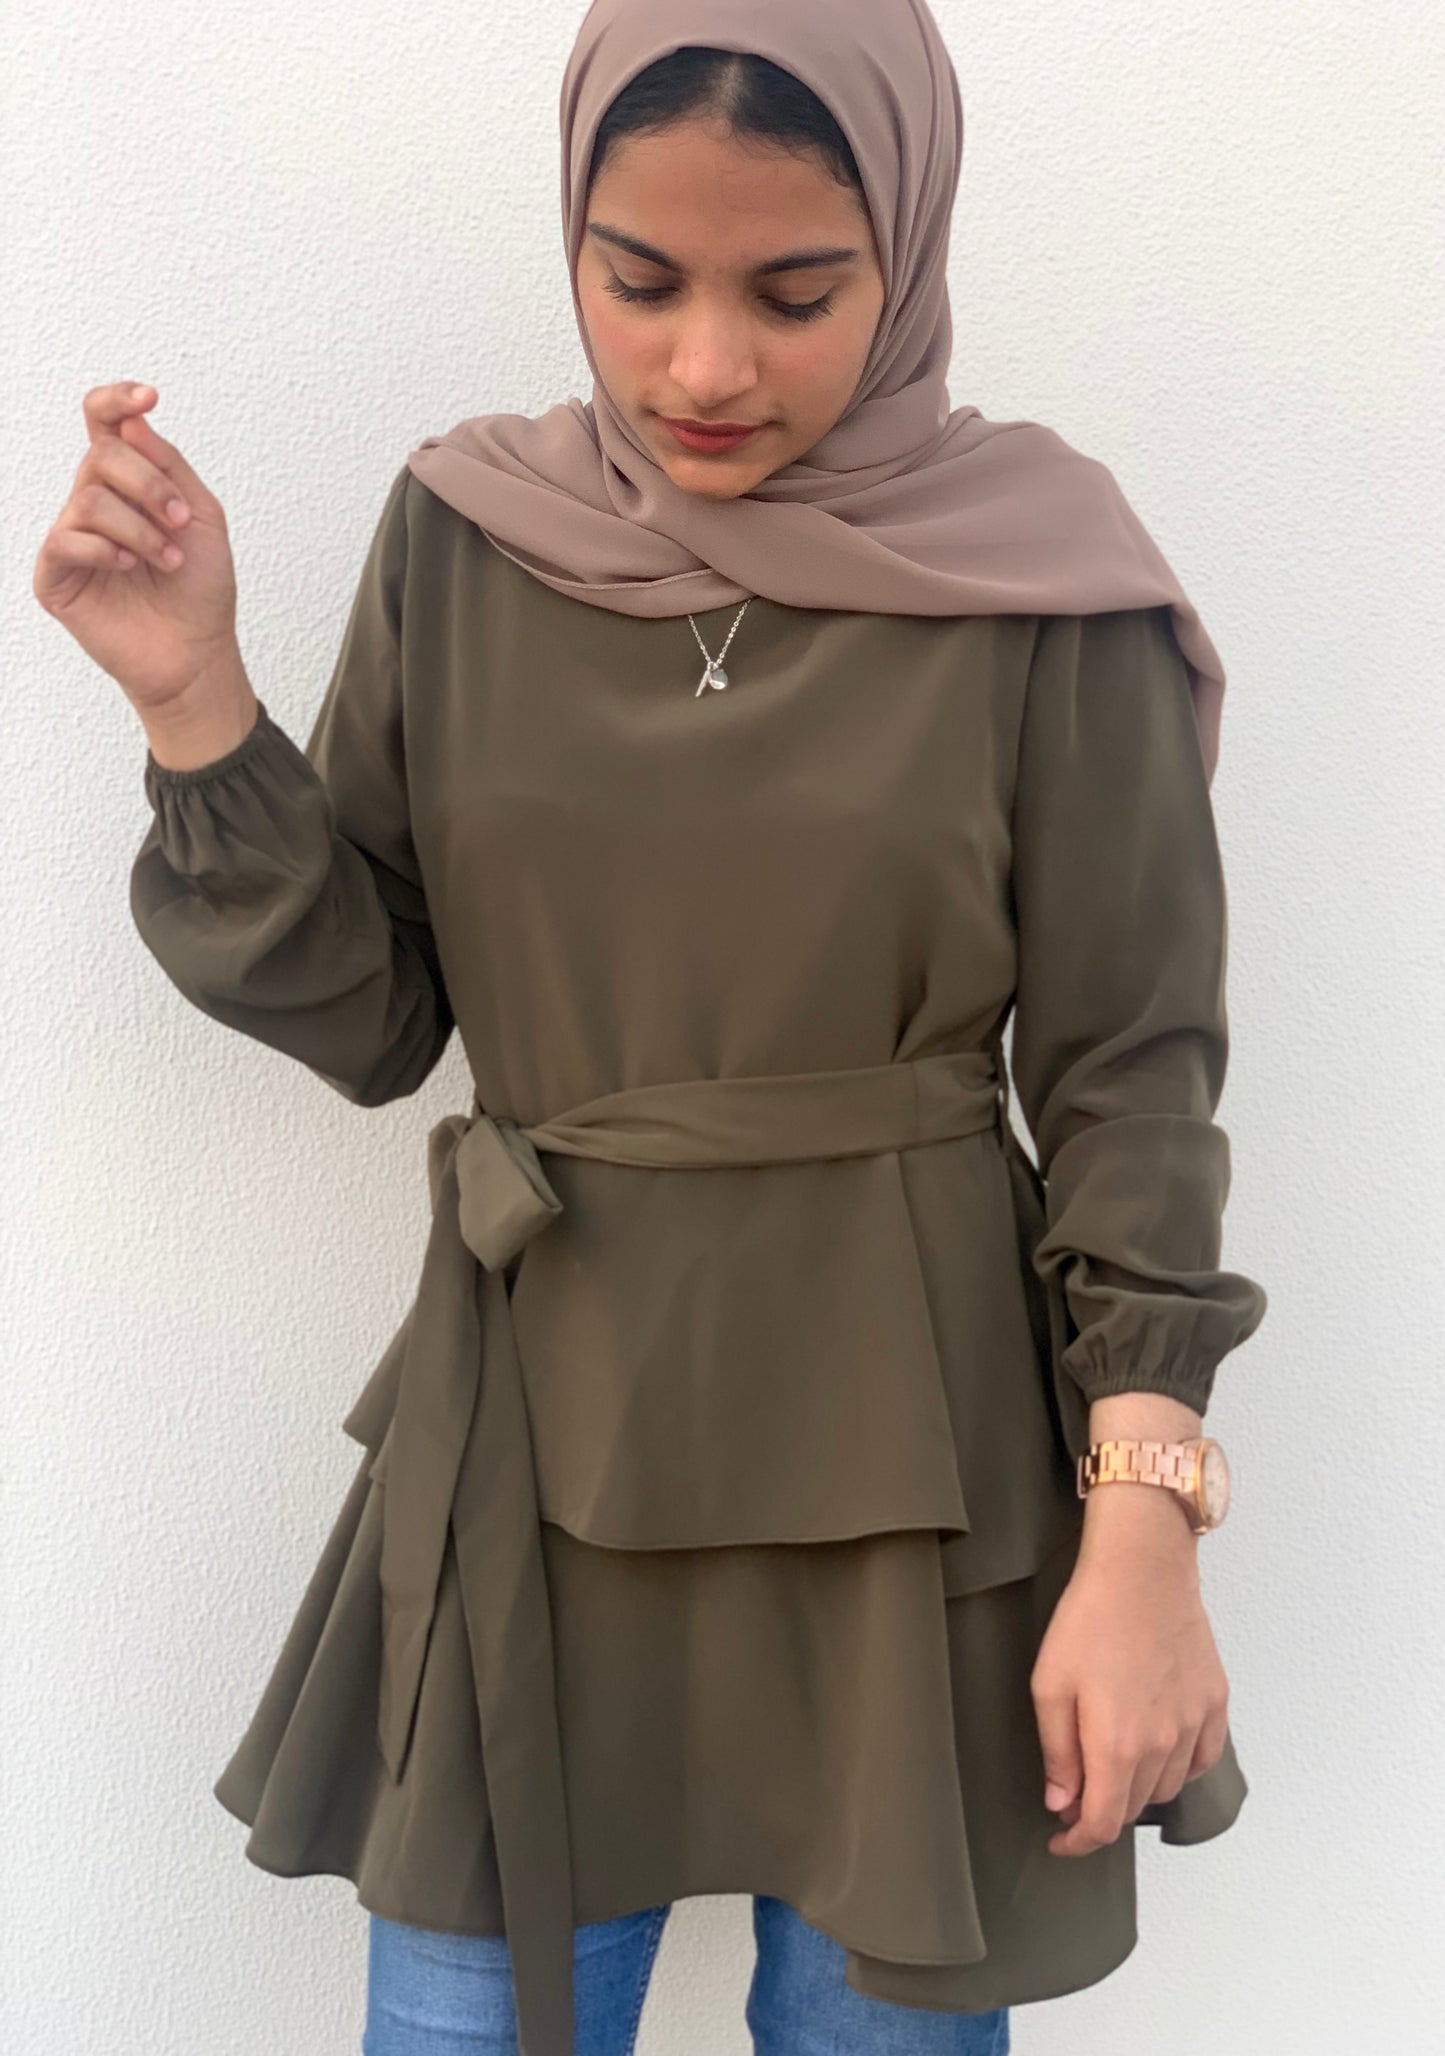 Army Green Layered Top with Belt